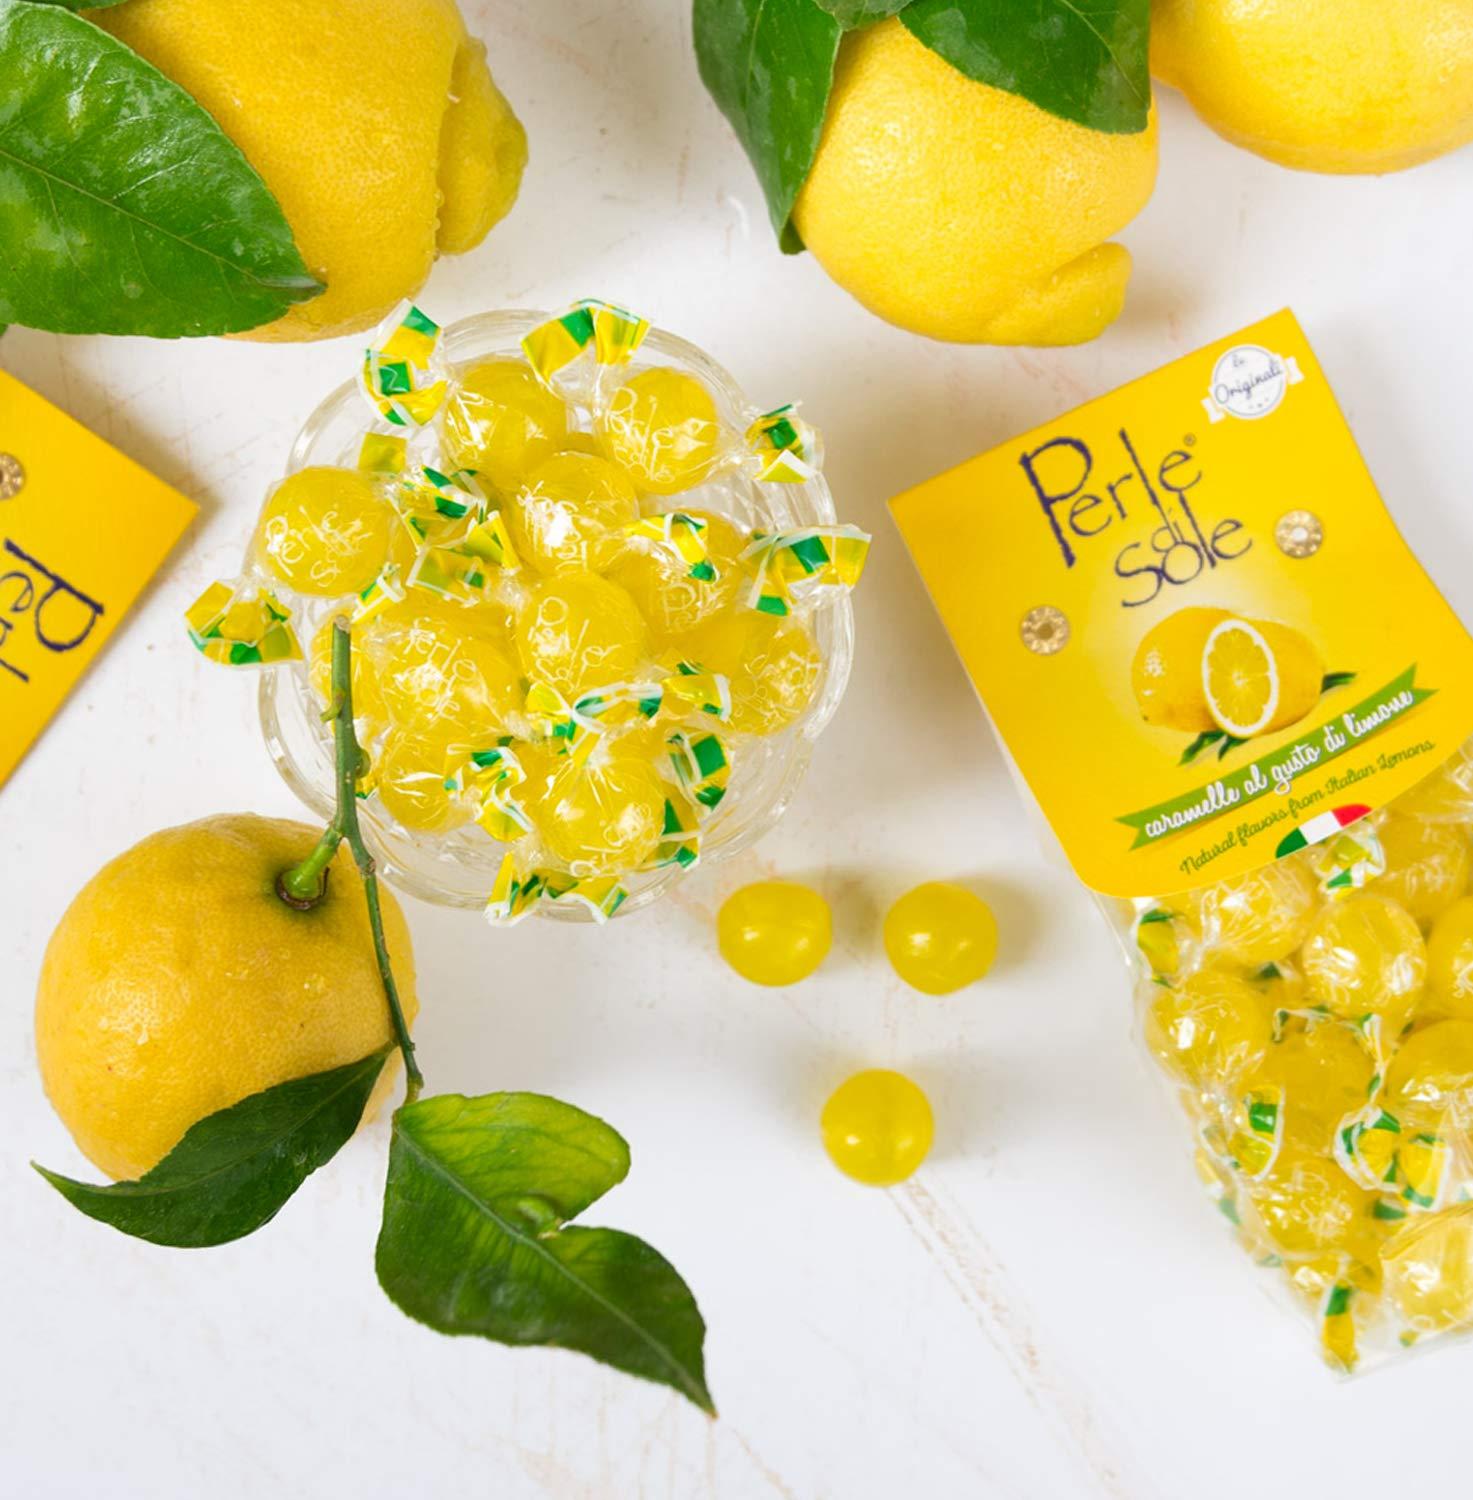 The original Perle di Sole Lemon Drops made with Essential Oils of Lemons  from the Amalfi Coast (7.05 oz 200 g) - Single Pack